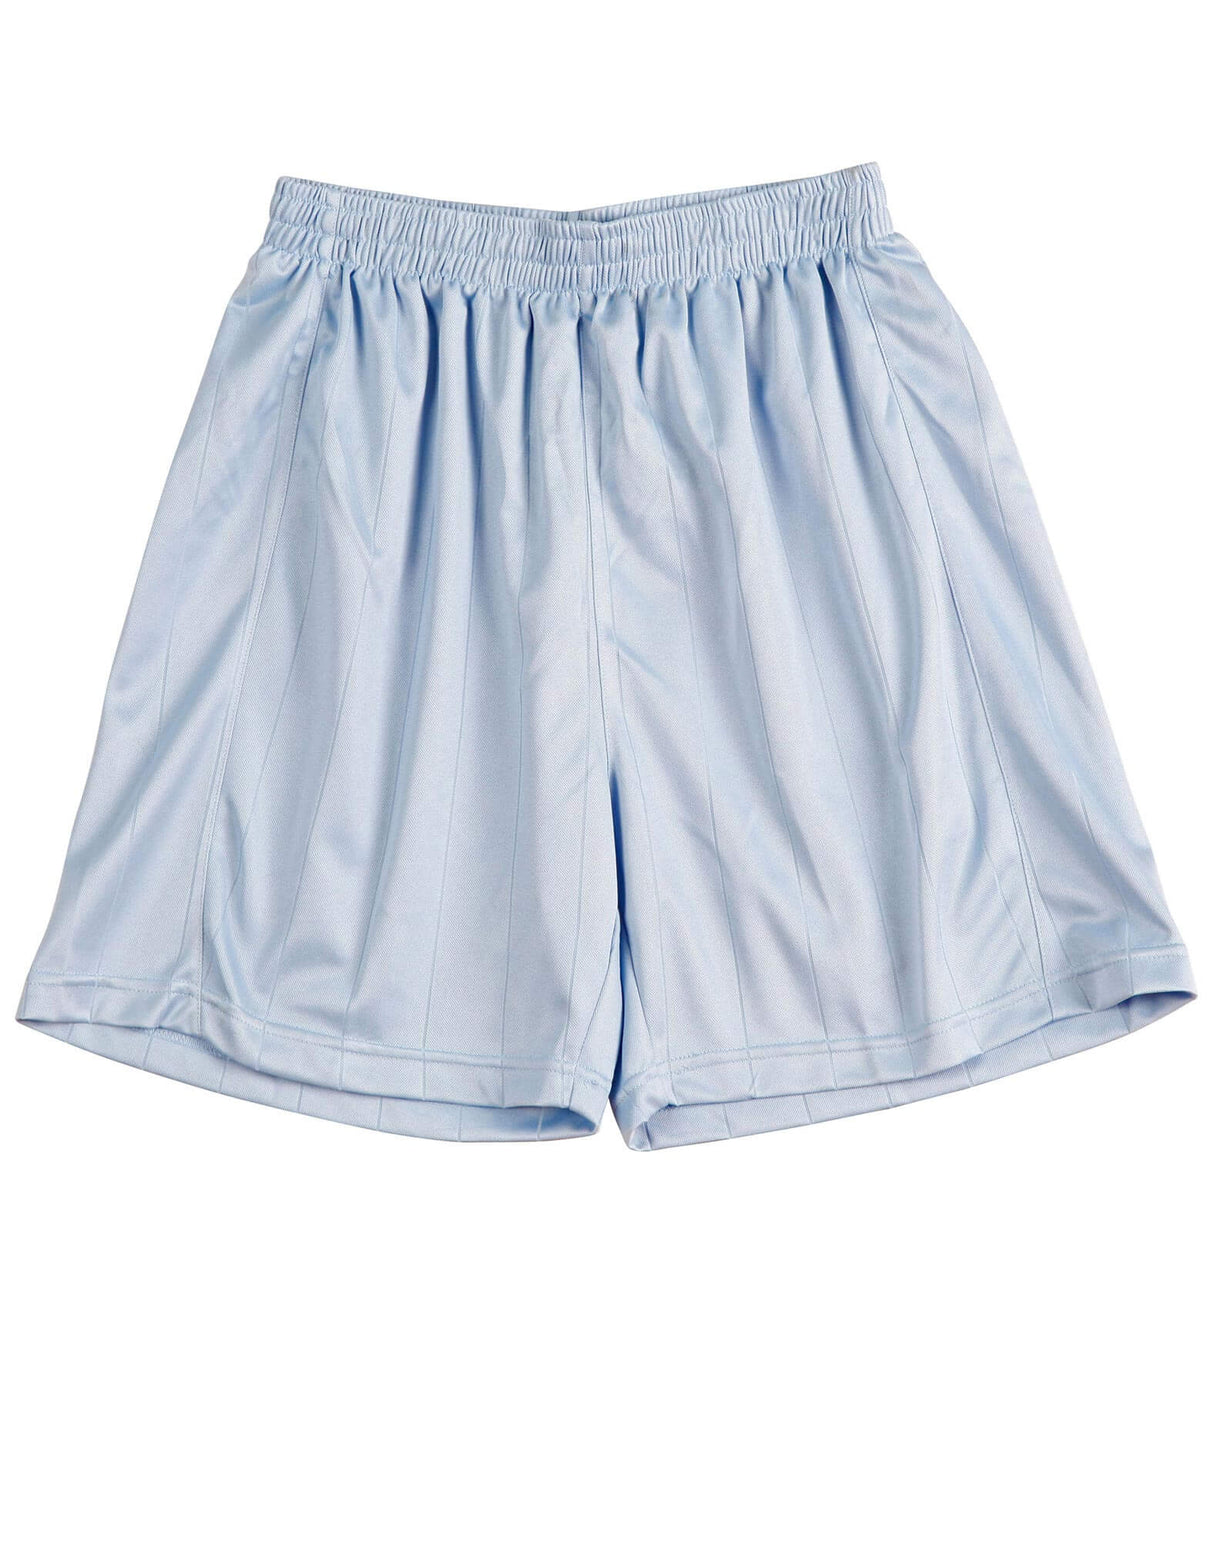 SS25 Soccer Shorts Adult